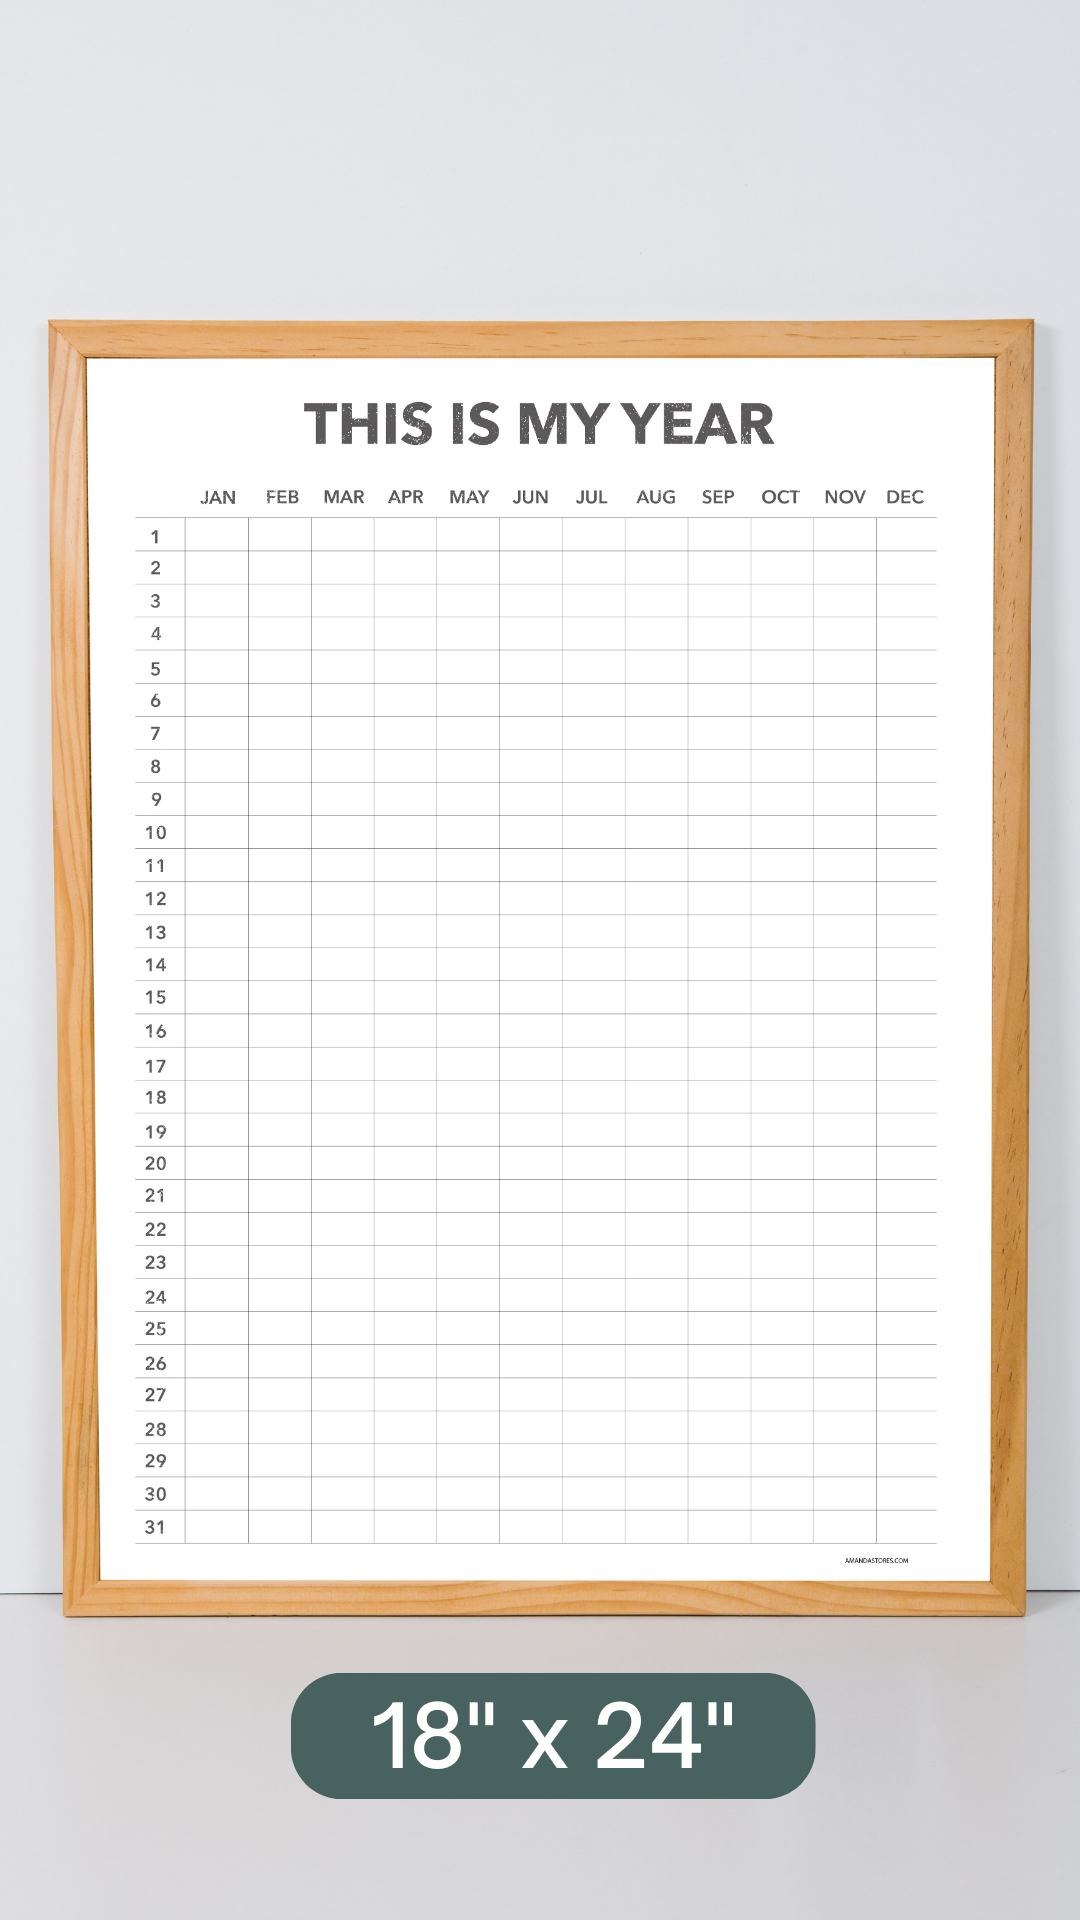 This is My Year - Reusable Forever Wall Calendar - 18" x 24"- PHYSICAL COPY